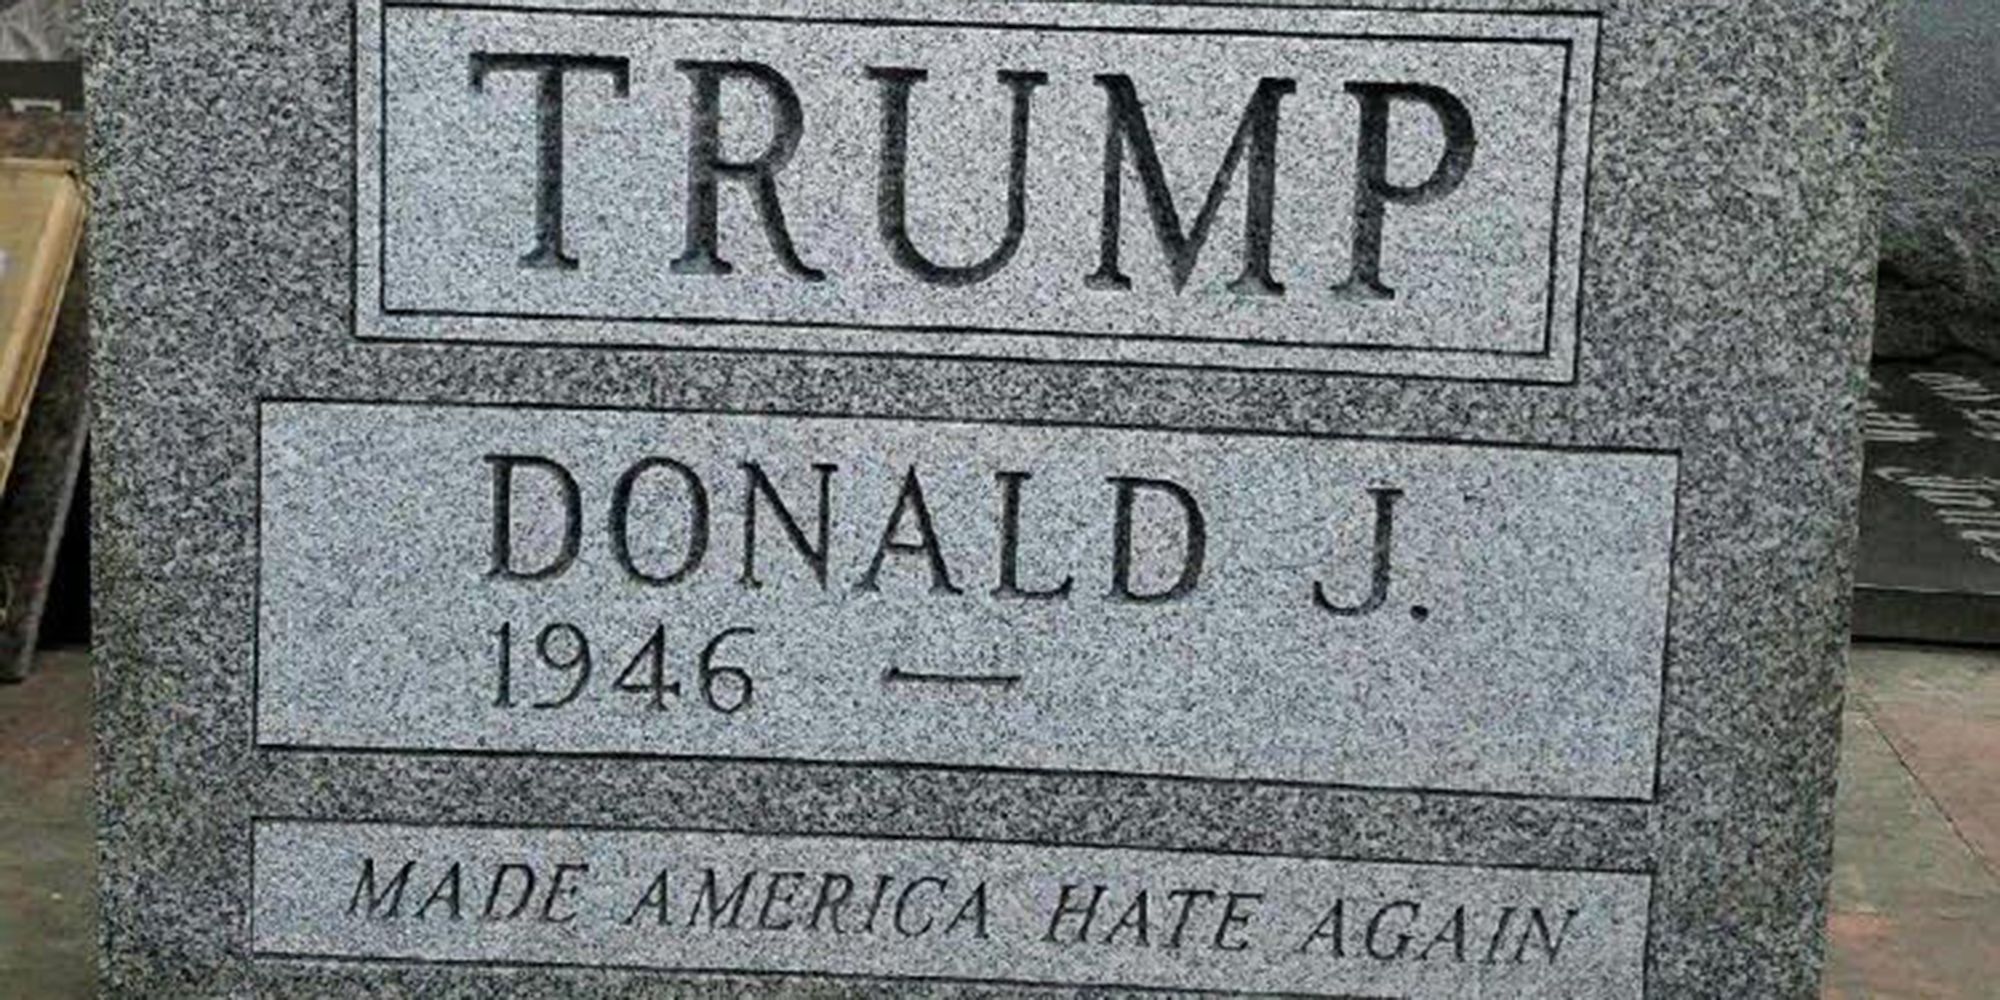 The Artist Who Planted a Trump Tombstone in Central Park Explained ...